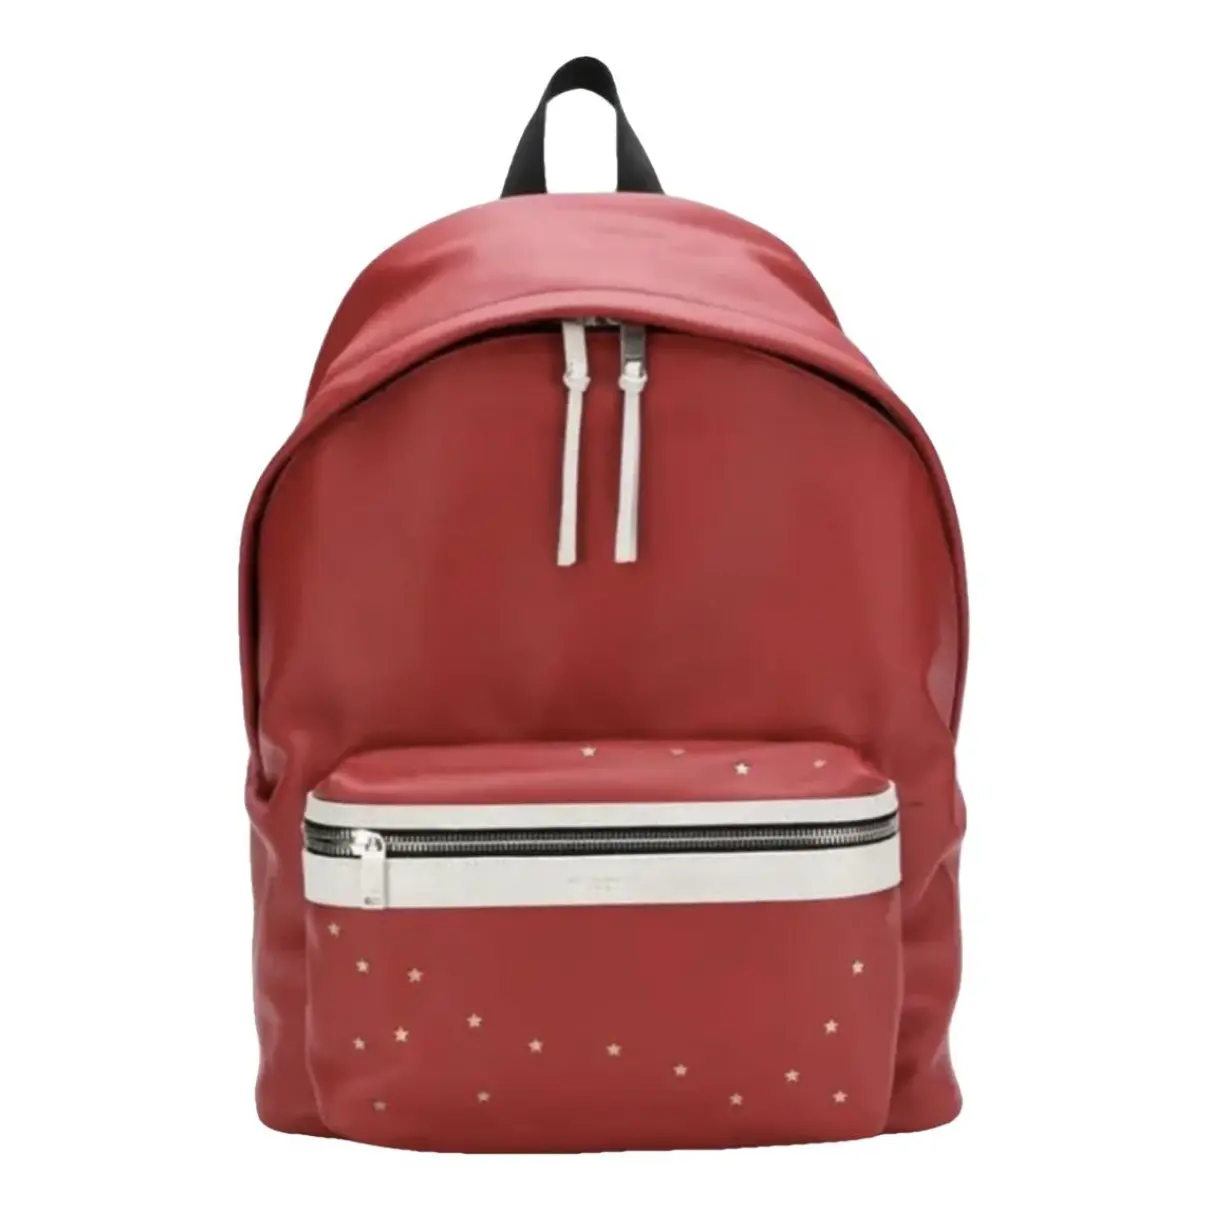 City Backpack leather bag